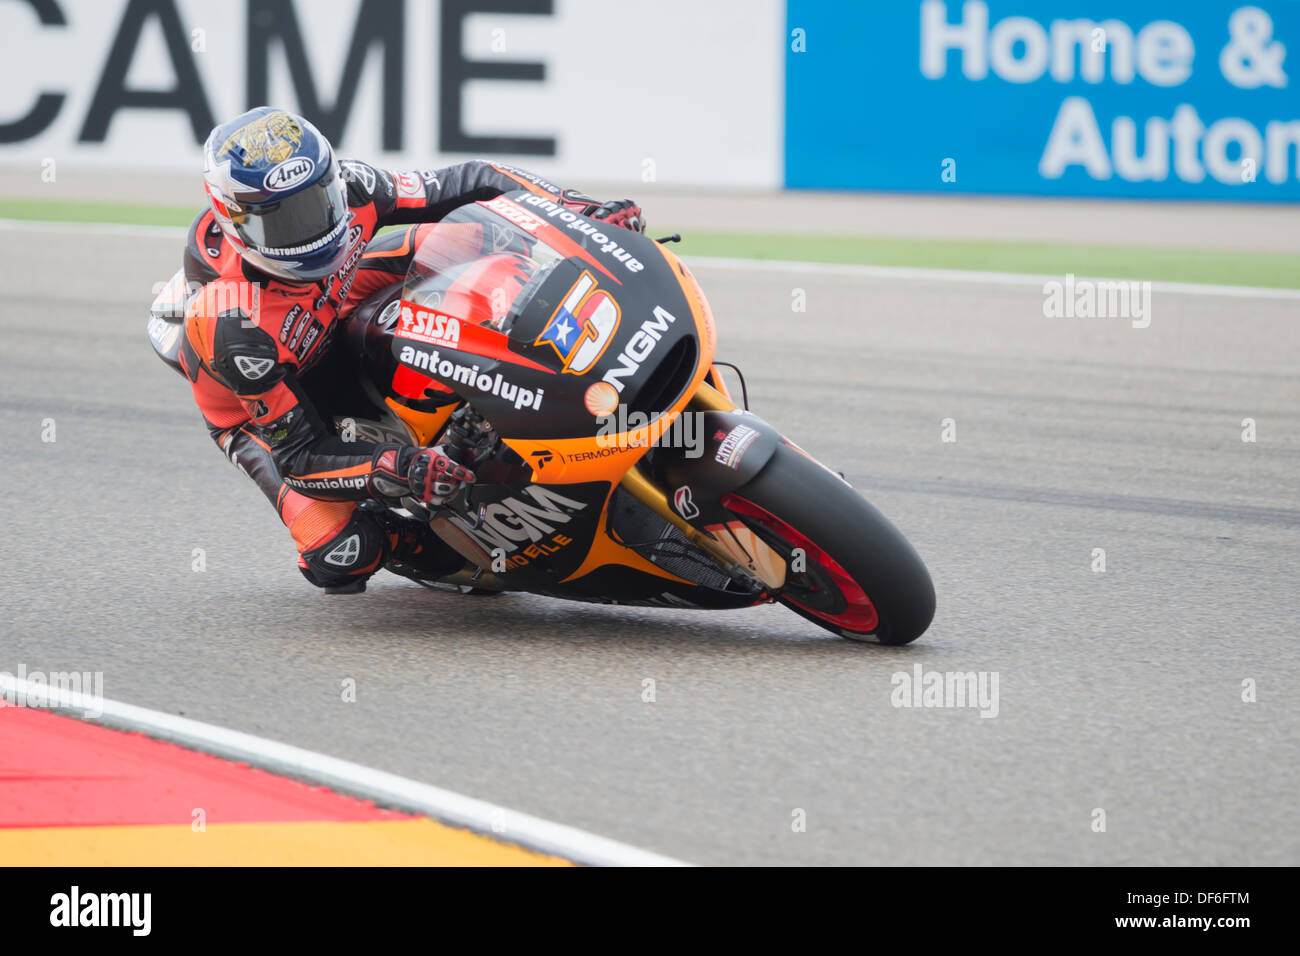 American rider, Colin Edwards, tries to get a good result in qulifying 1 in Aragon Motogp grand prix (MotoGp), in Alcañiz circuit, Spain on september 28th, 2013 NGM Mobile Forward Racing rider Colin Edwards has finished 7th (19) in qualifiyin in Alcañiz Circuit, Teruel, Spain. Stock Photo